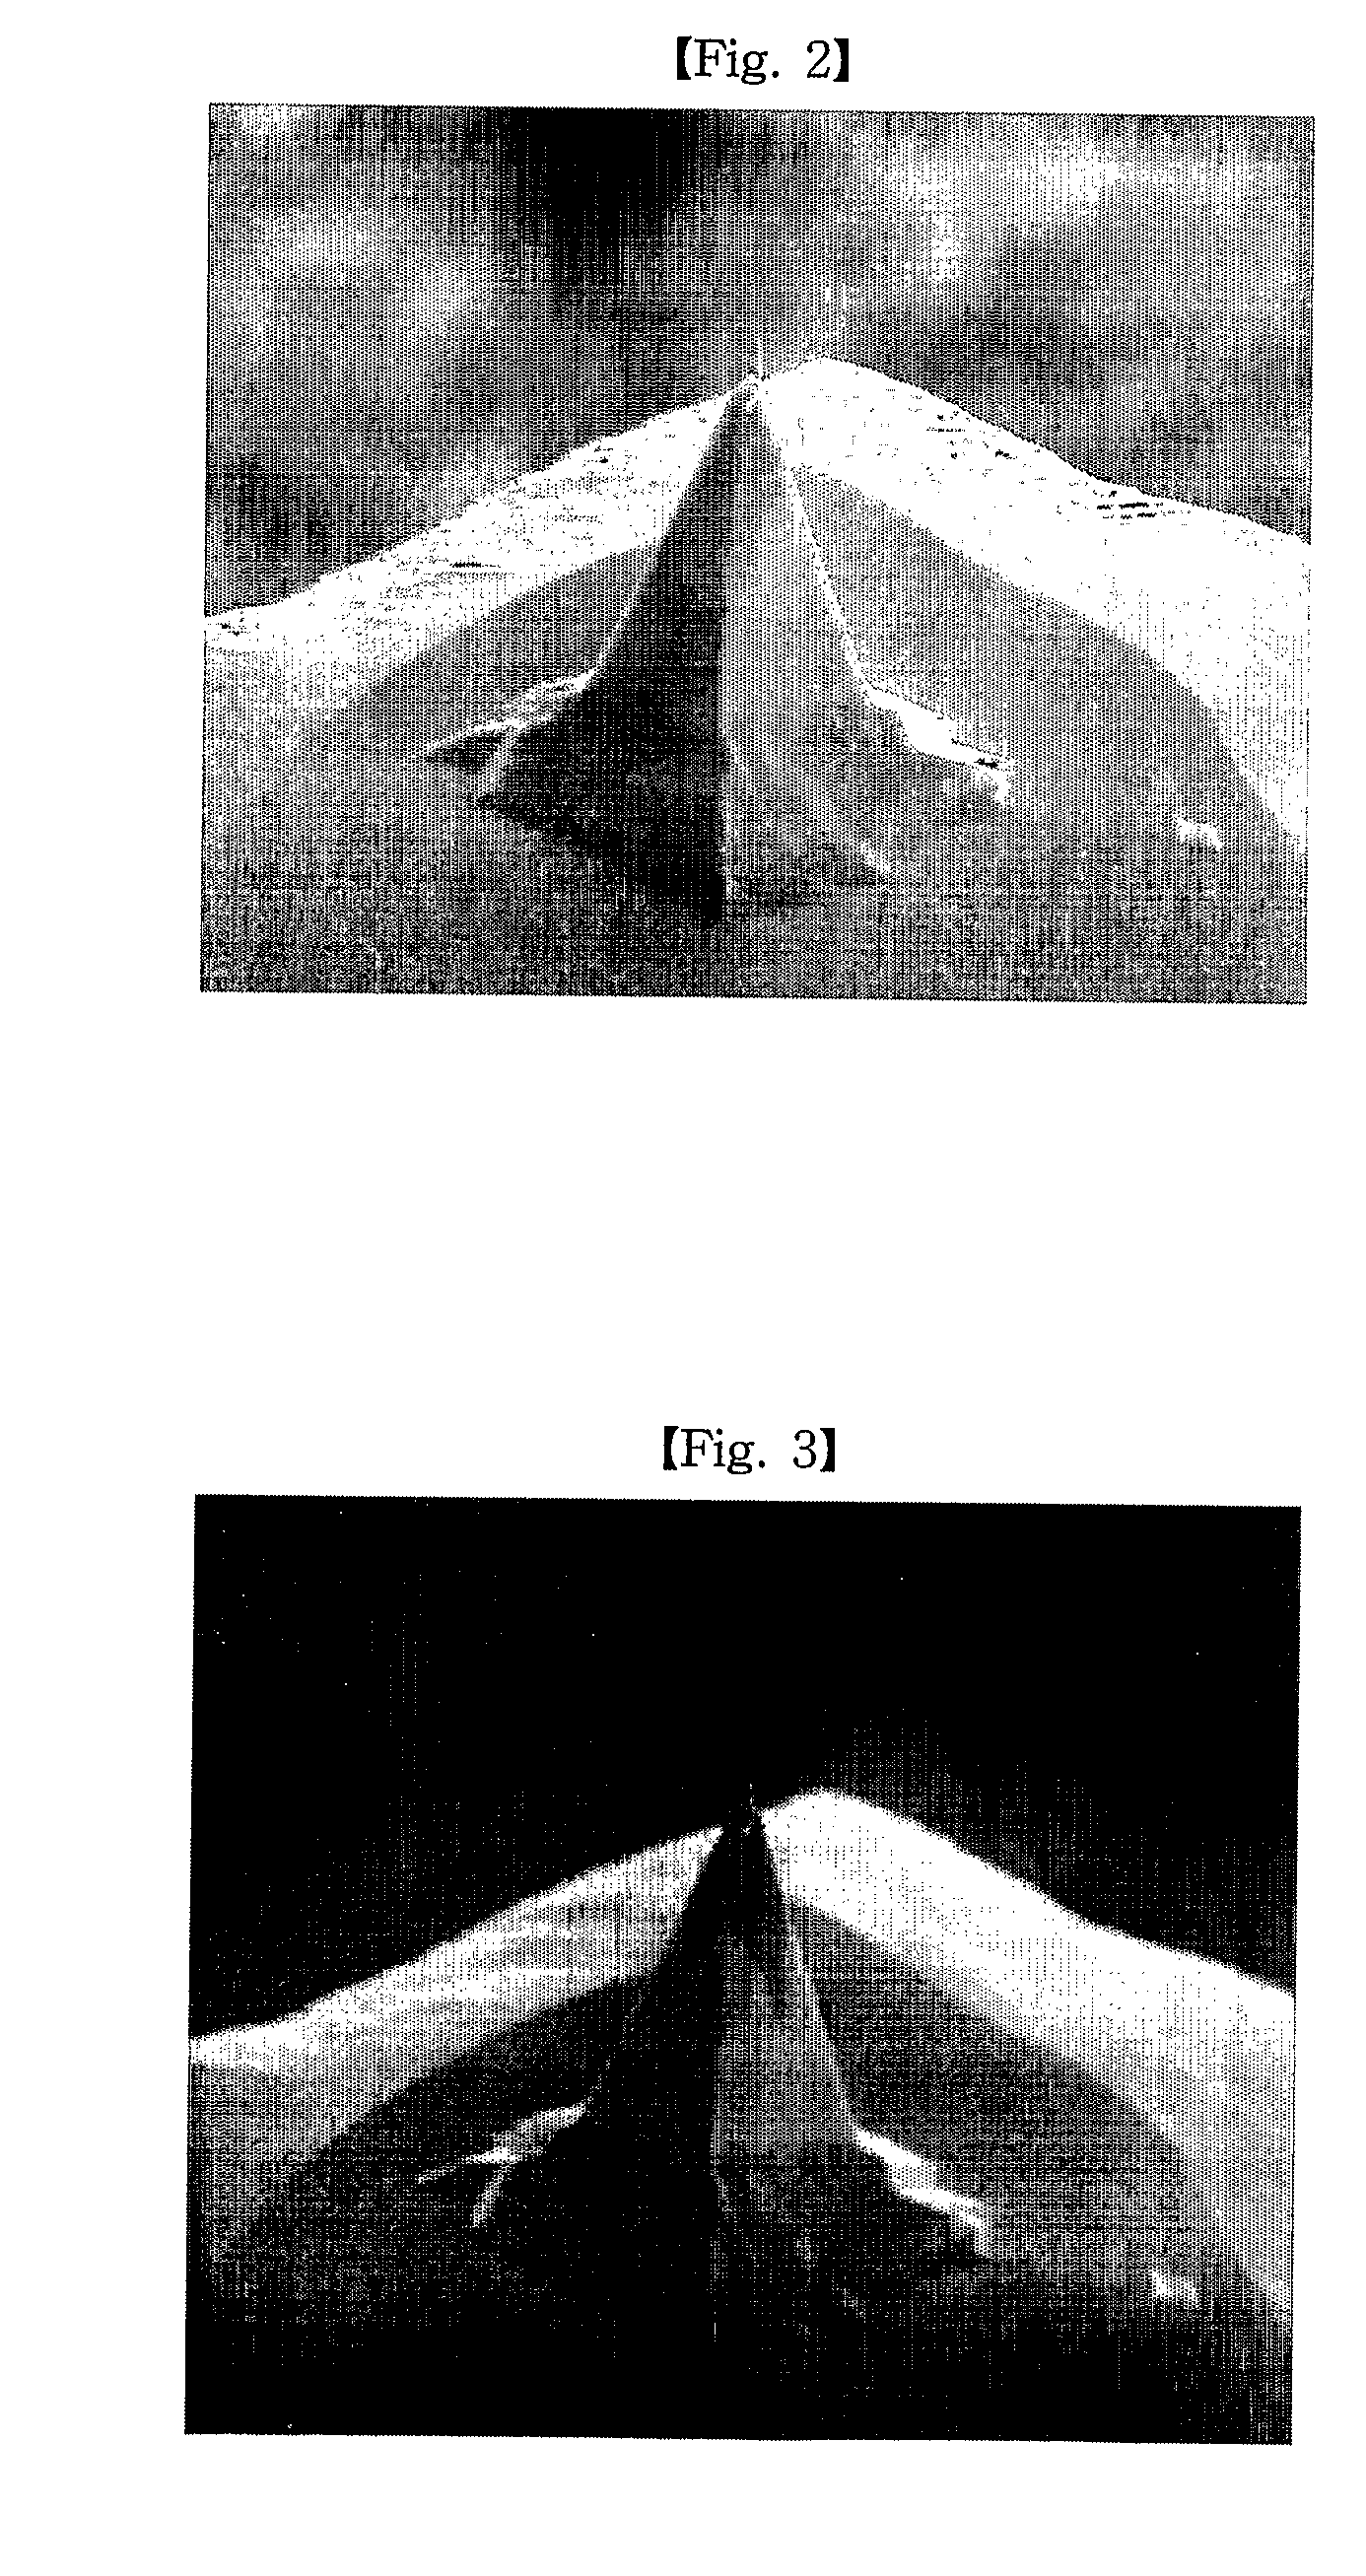 Method for fabricating spm and cd-spm nanoneedle probe using ion beam and spm and cd-spm nanoneedle probe thereby